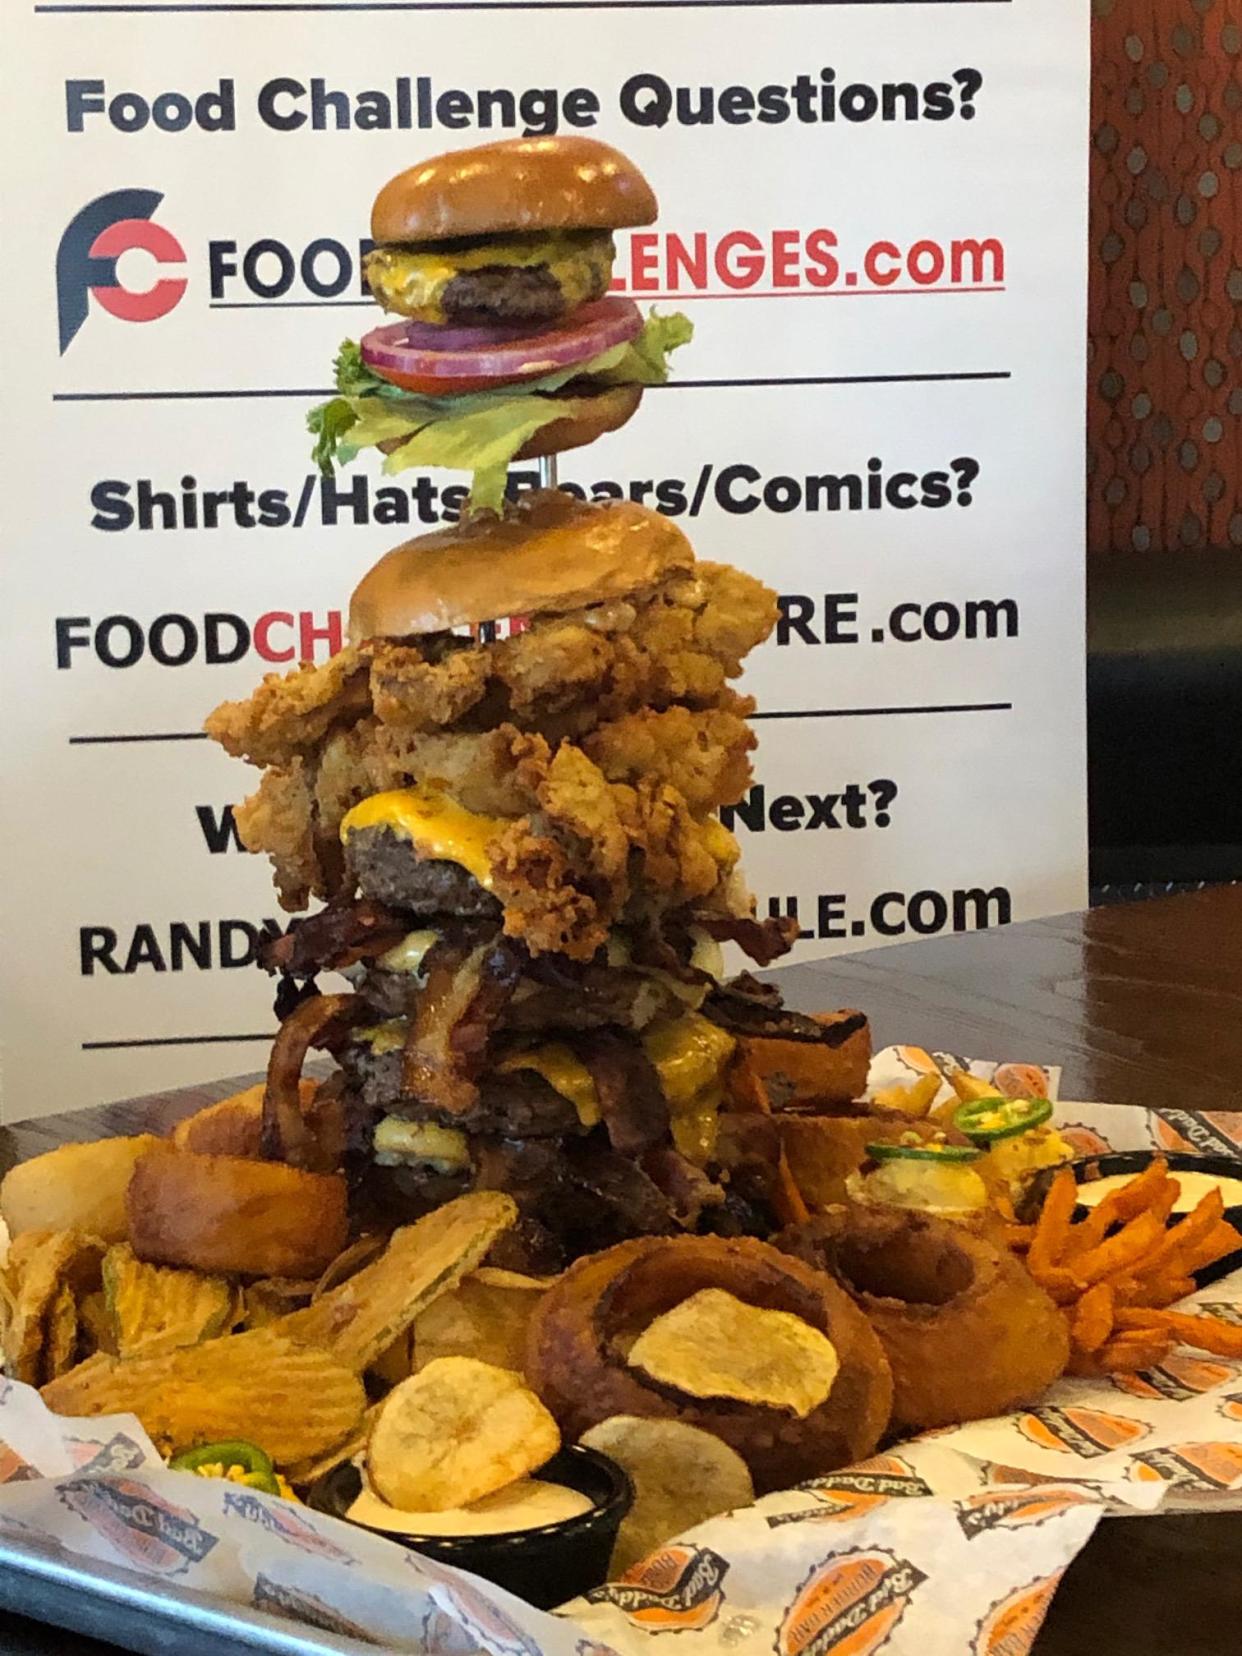 The Fat Daddy Challenge at Bad Daddy's Burger Bar in Gastonia on Friday night, Sept. 11, 2020.